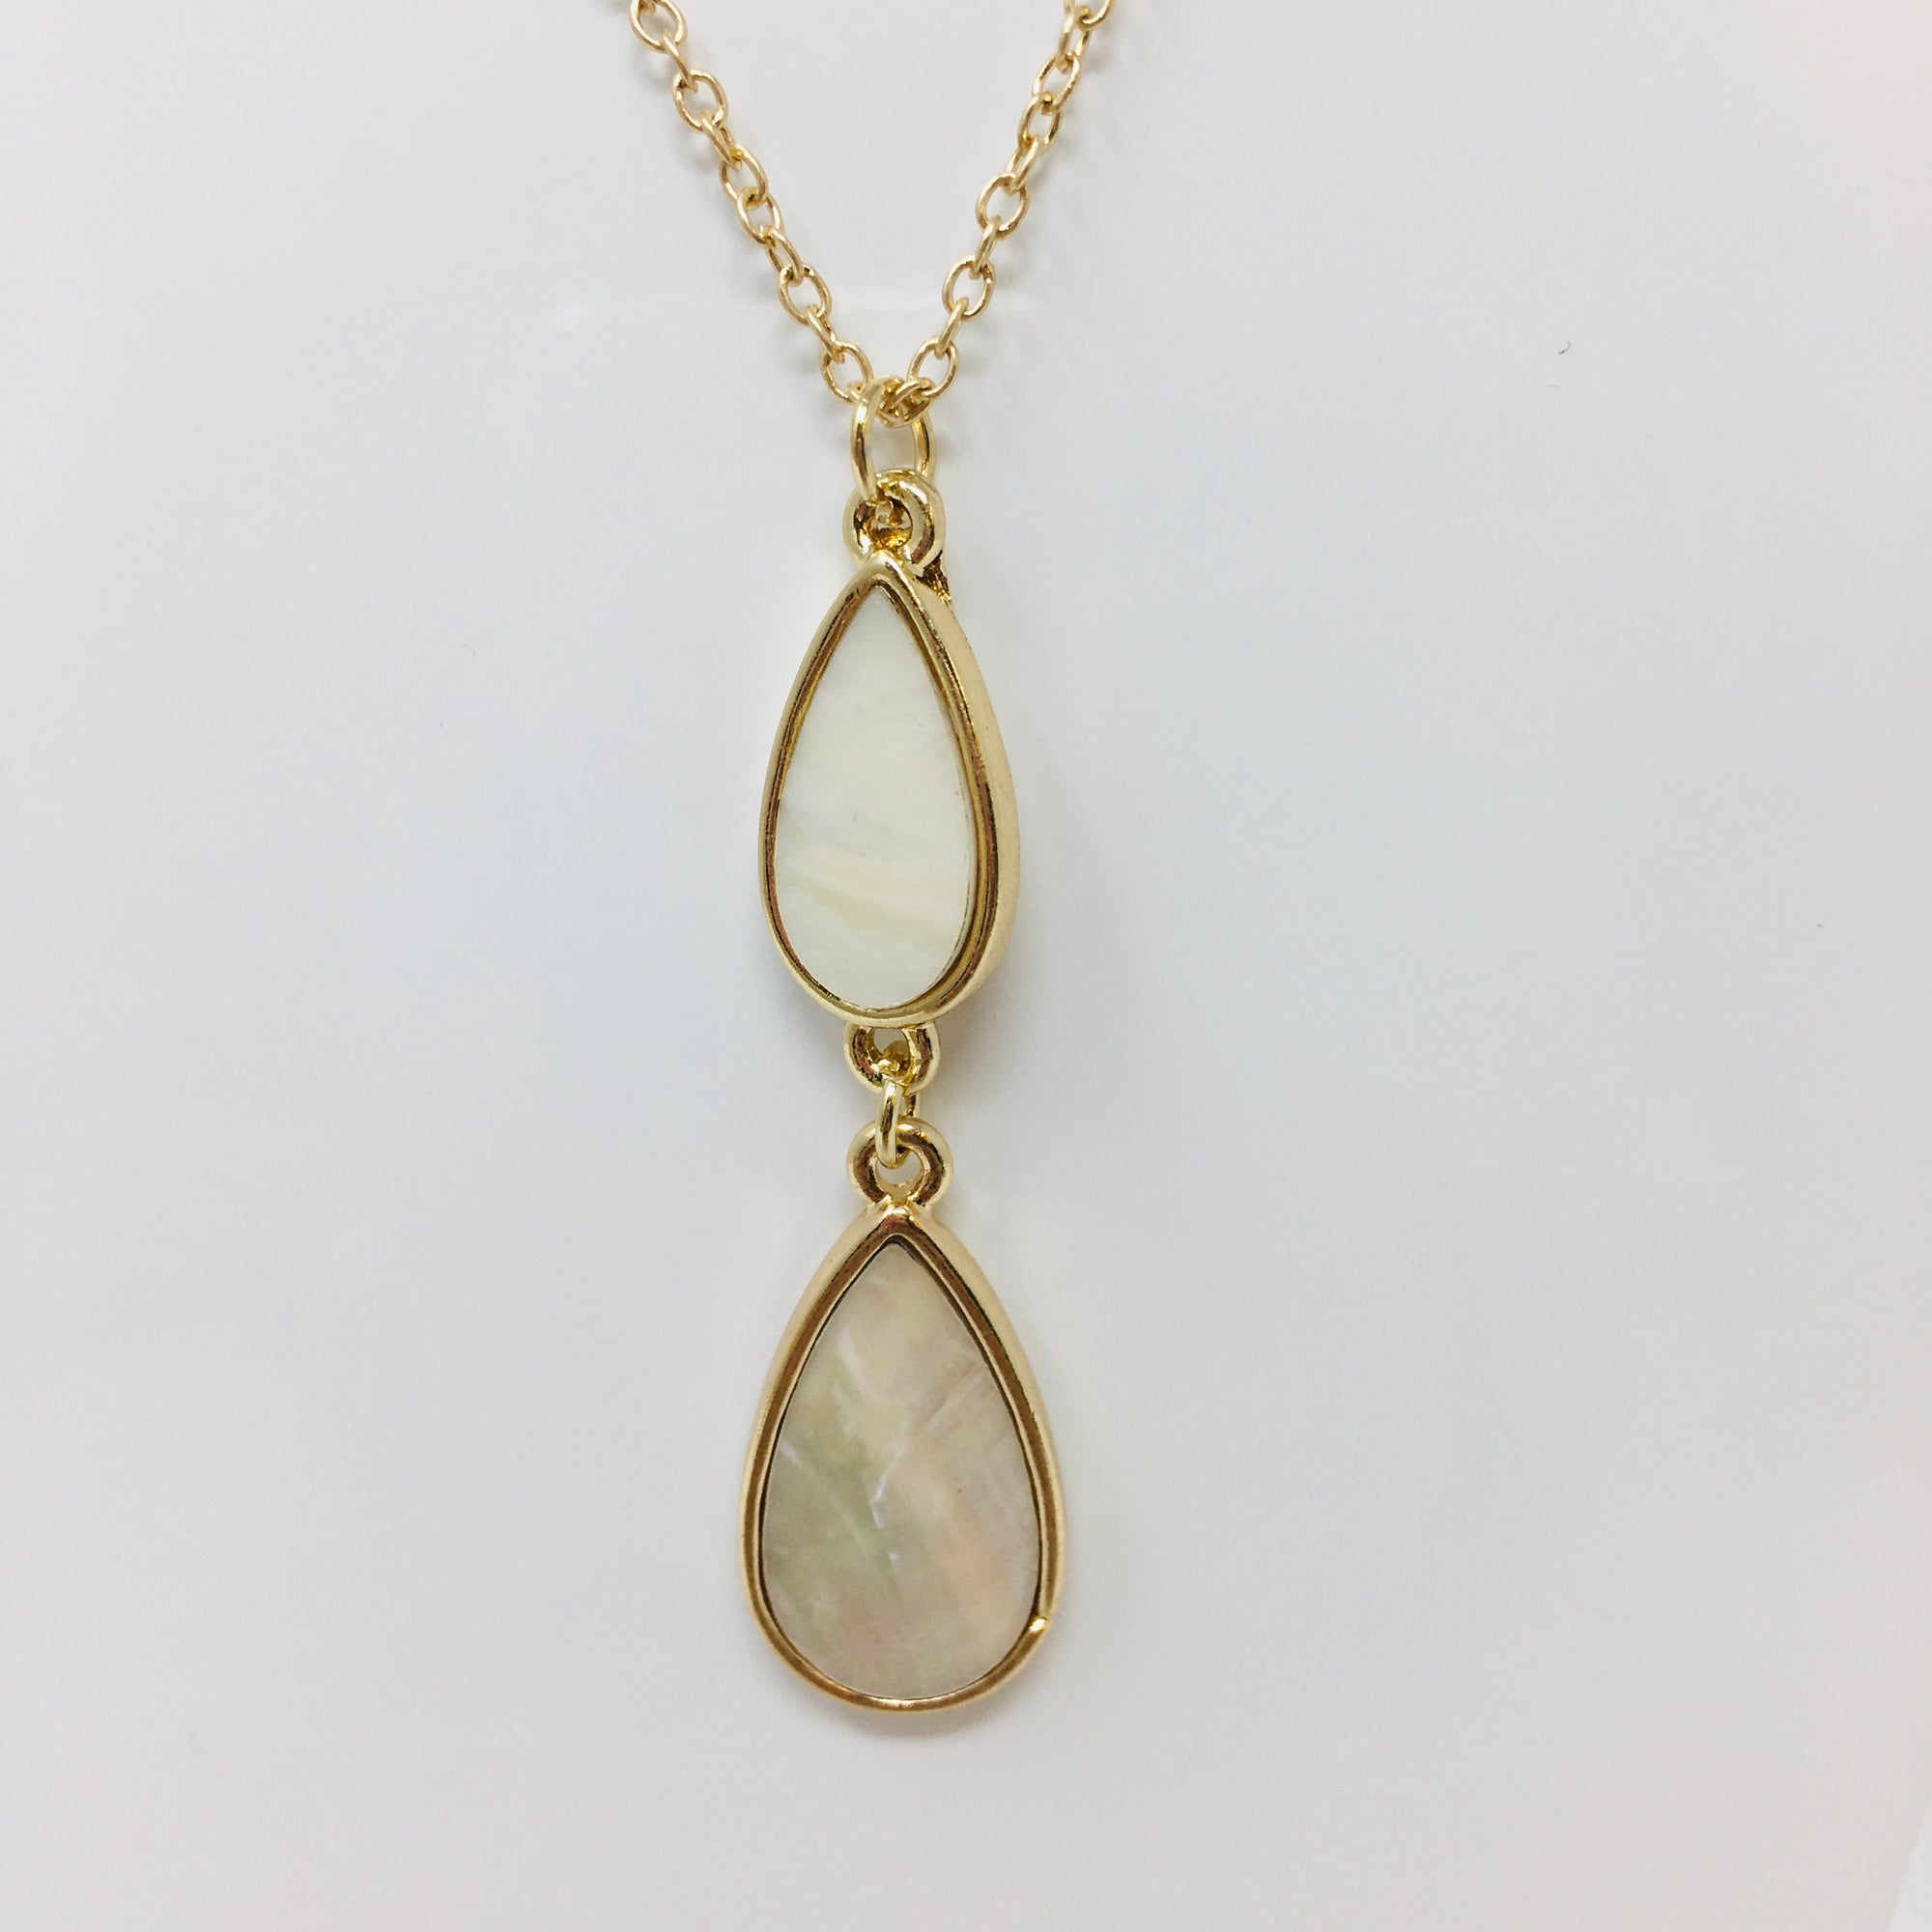 gold tone chain necklace with double teardrop pendant with mother of pearl inserts in the teardrops shown on a white bust form on white background